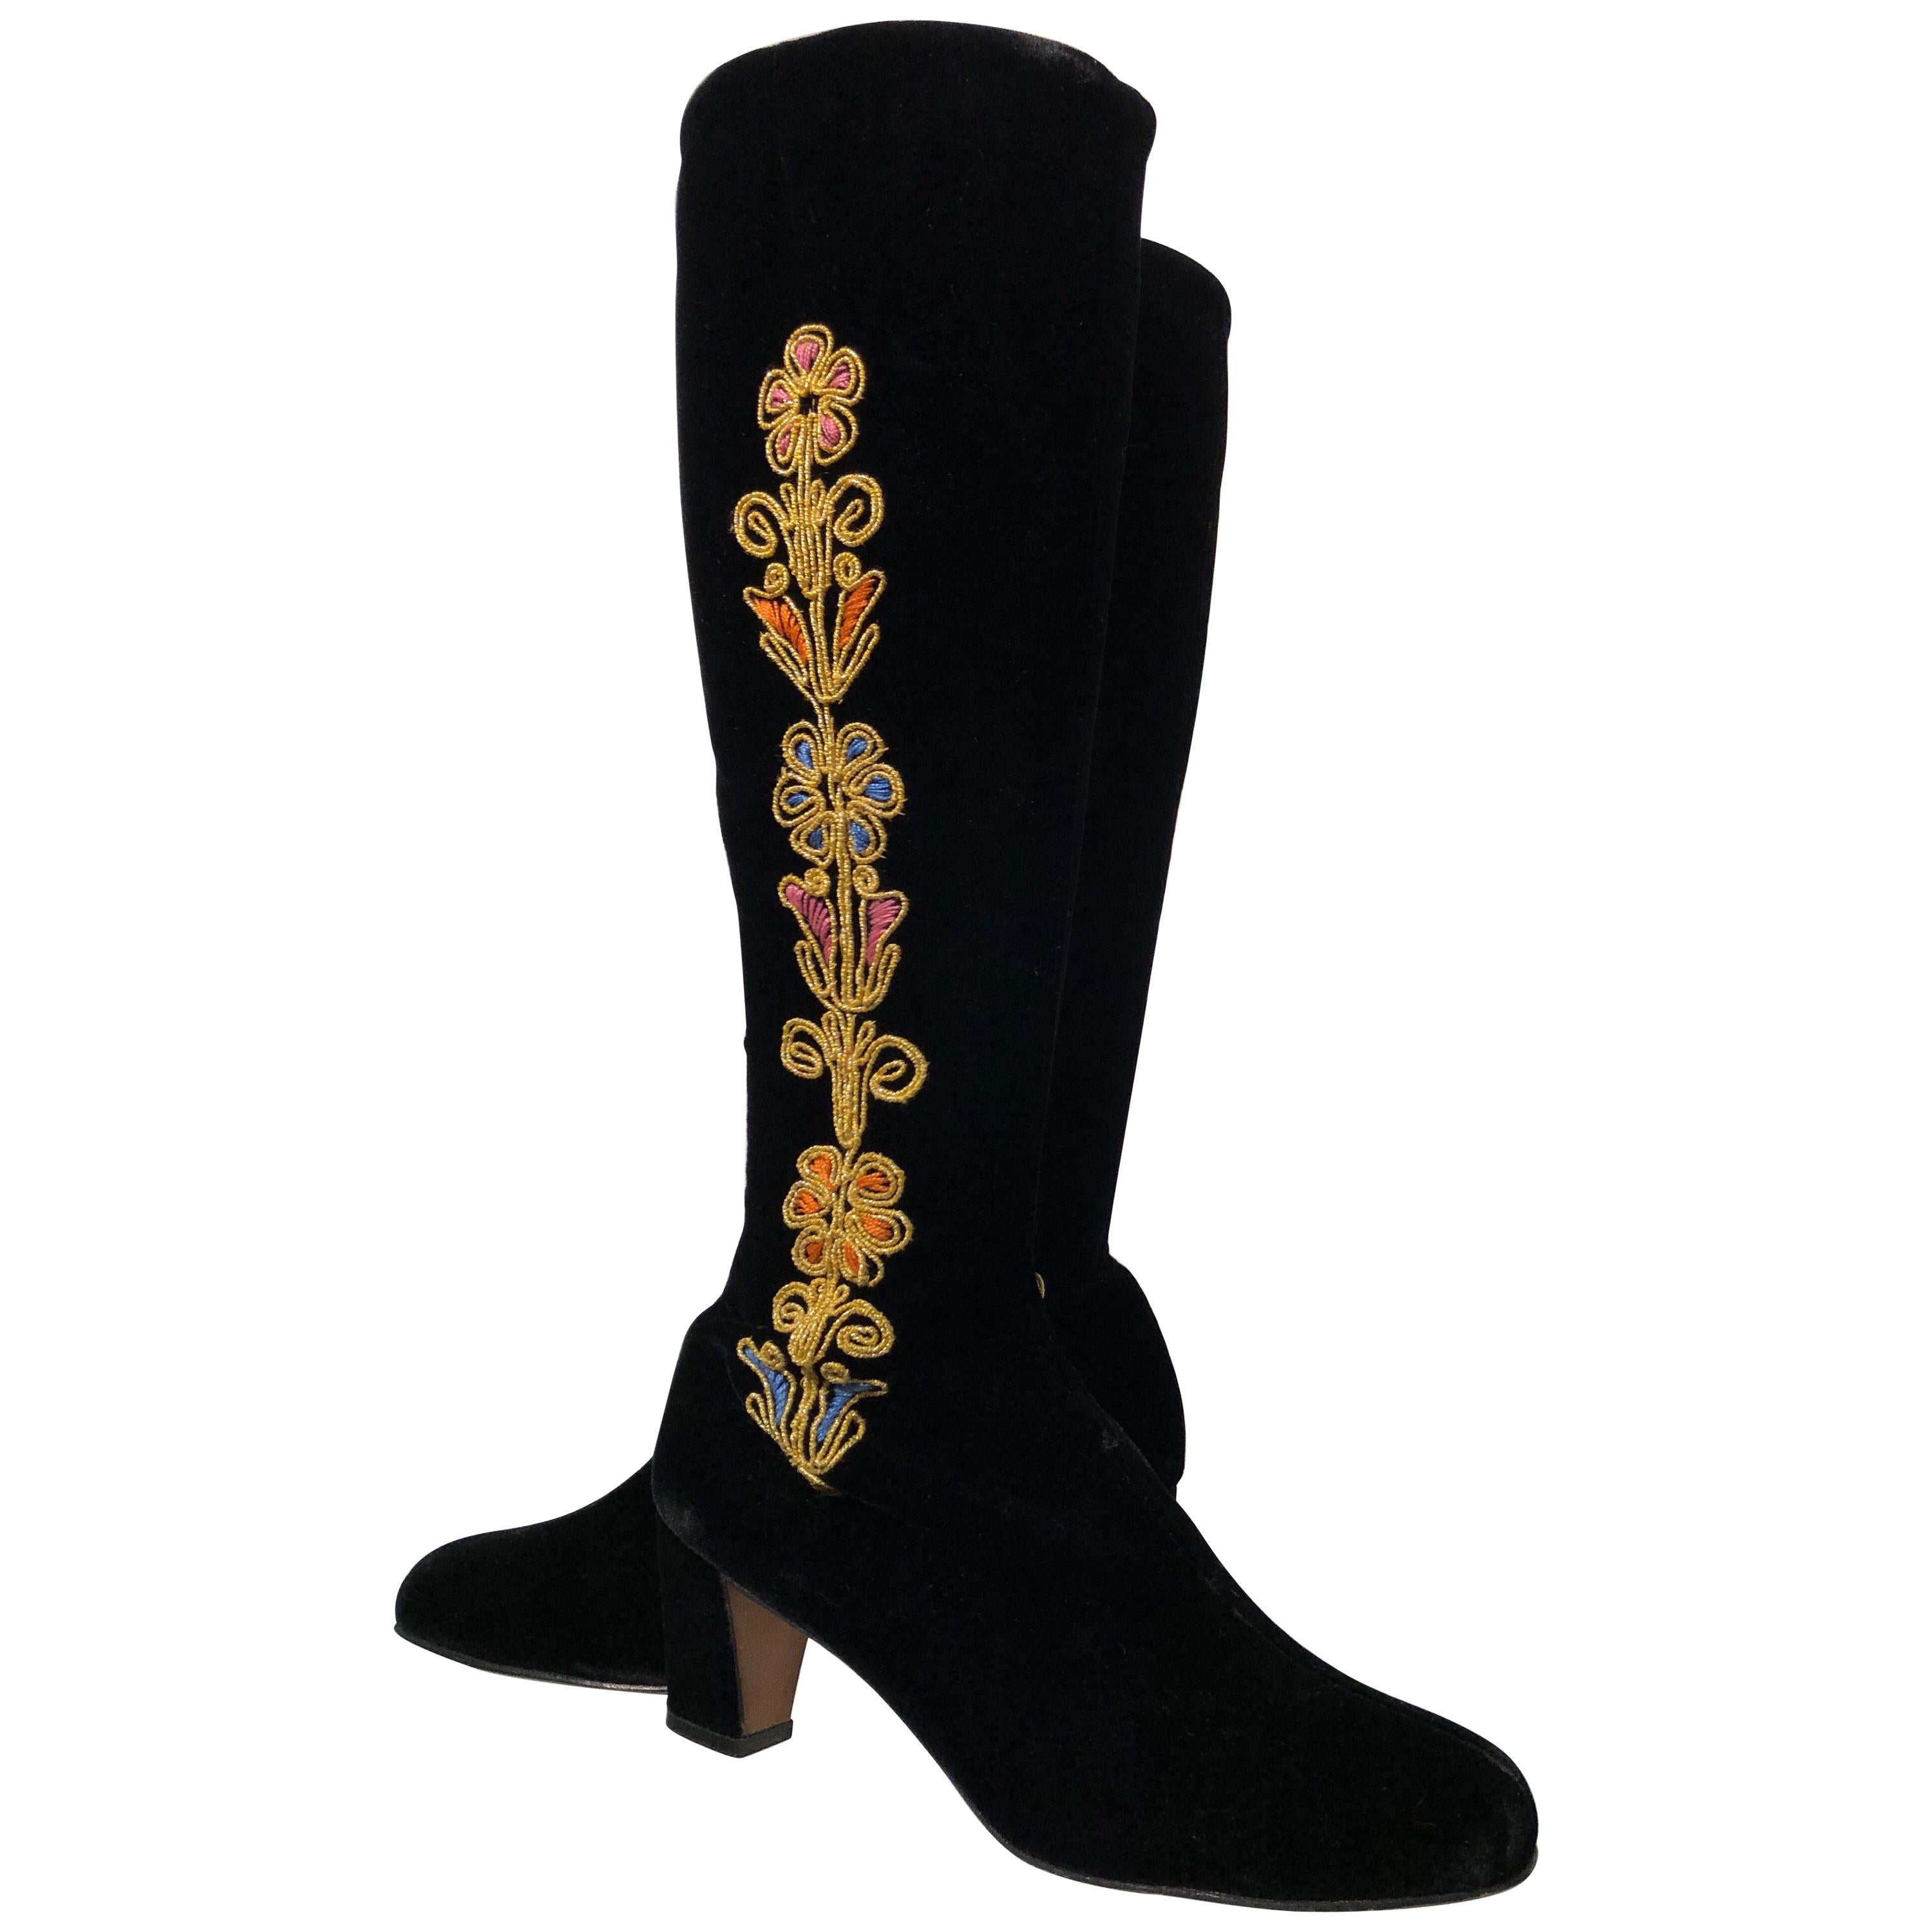 Black Velvet Knee-High Boots With Romantic Floral Cord Embroidery, 1960s  